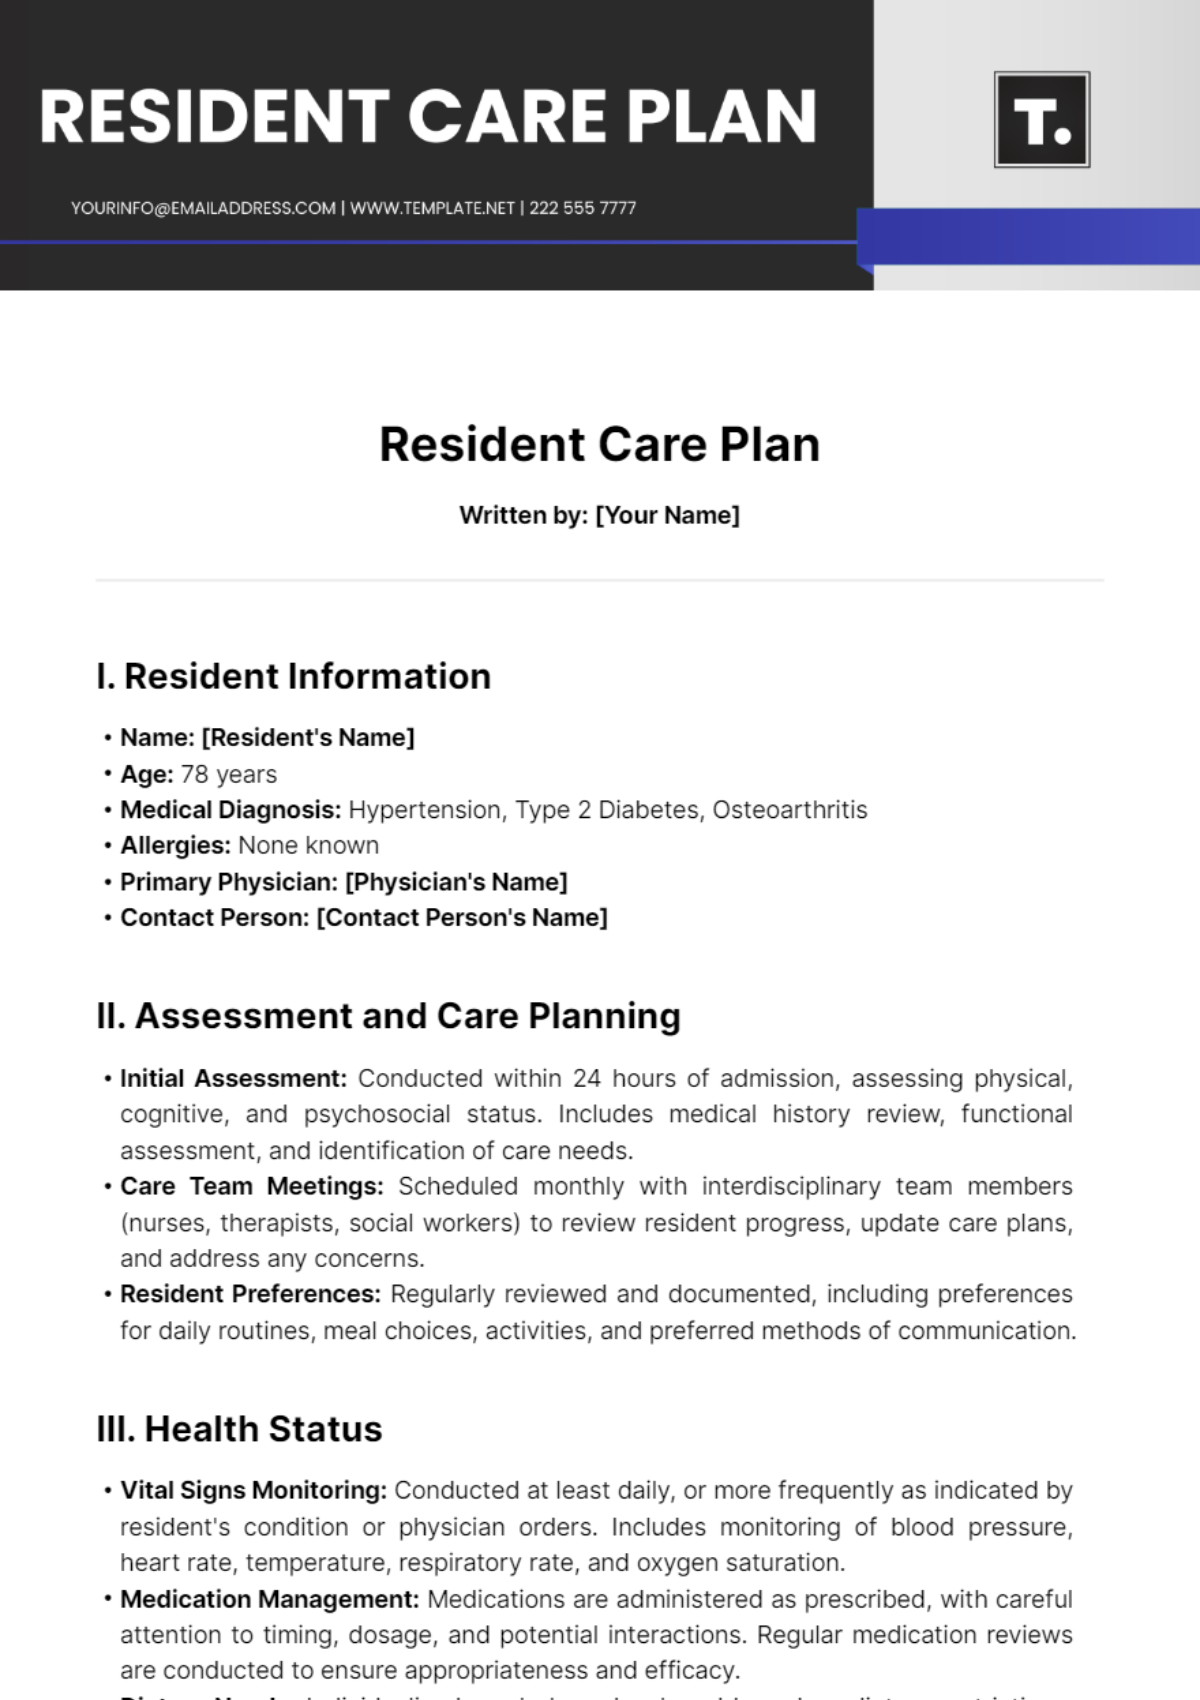 Resident Care Plan Template